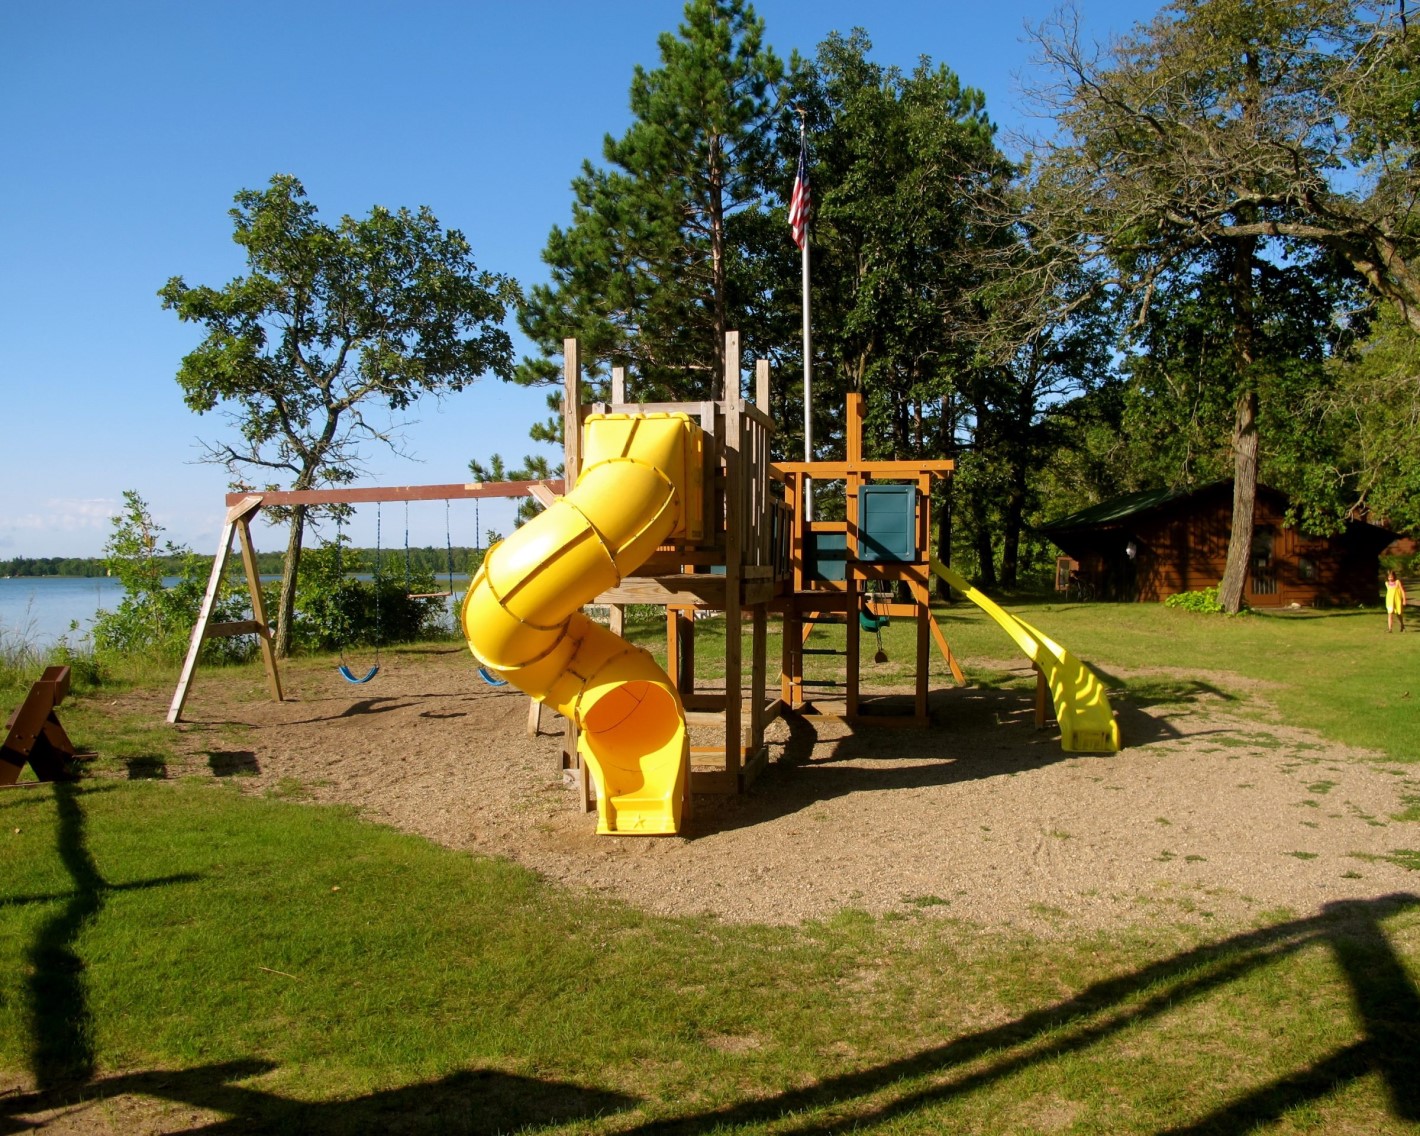 Picture of the Family Camp playground, located near the beach